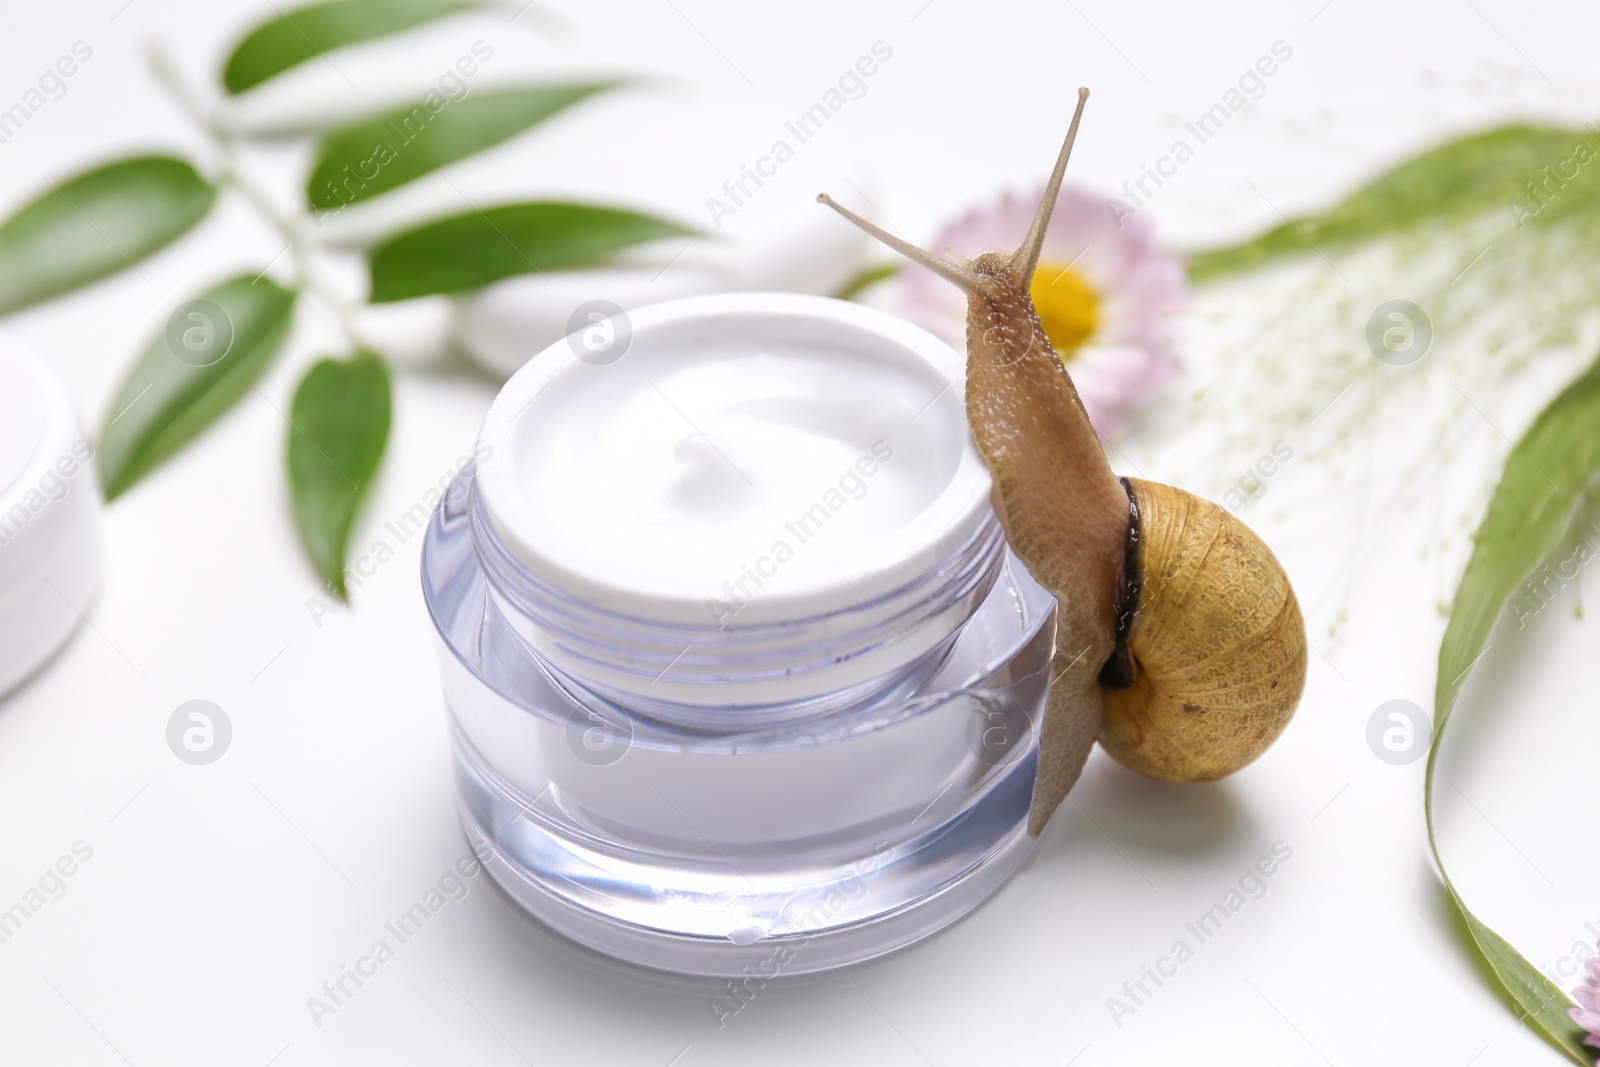 Photo of Snail and jar with cream on white background, closeup